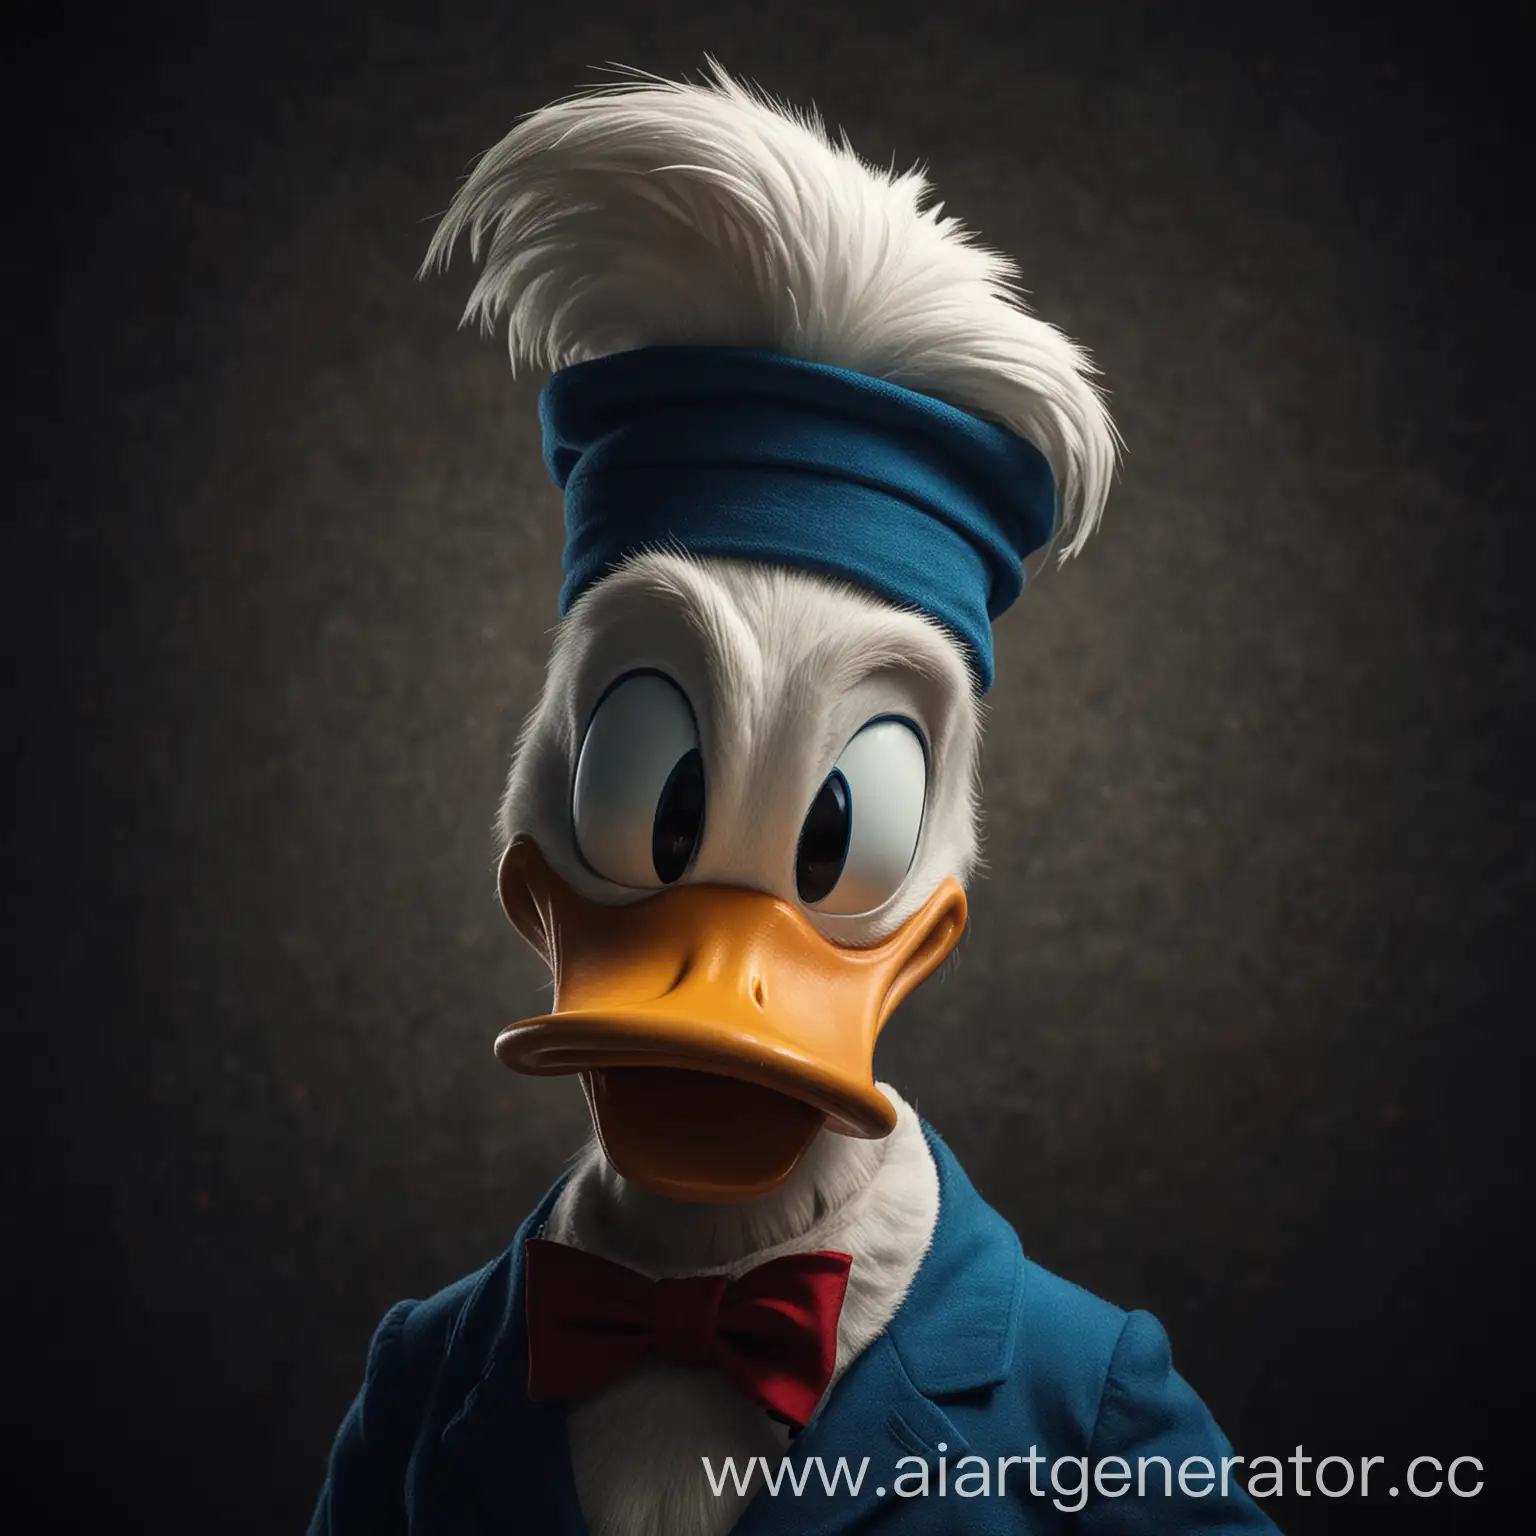 Donald-Duck-in-Dark-HDR-Style-with-Caption-Backdrop